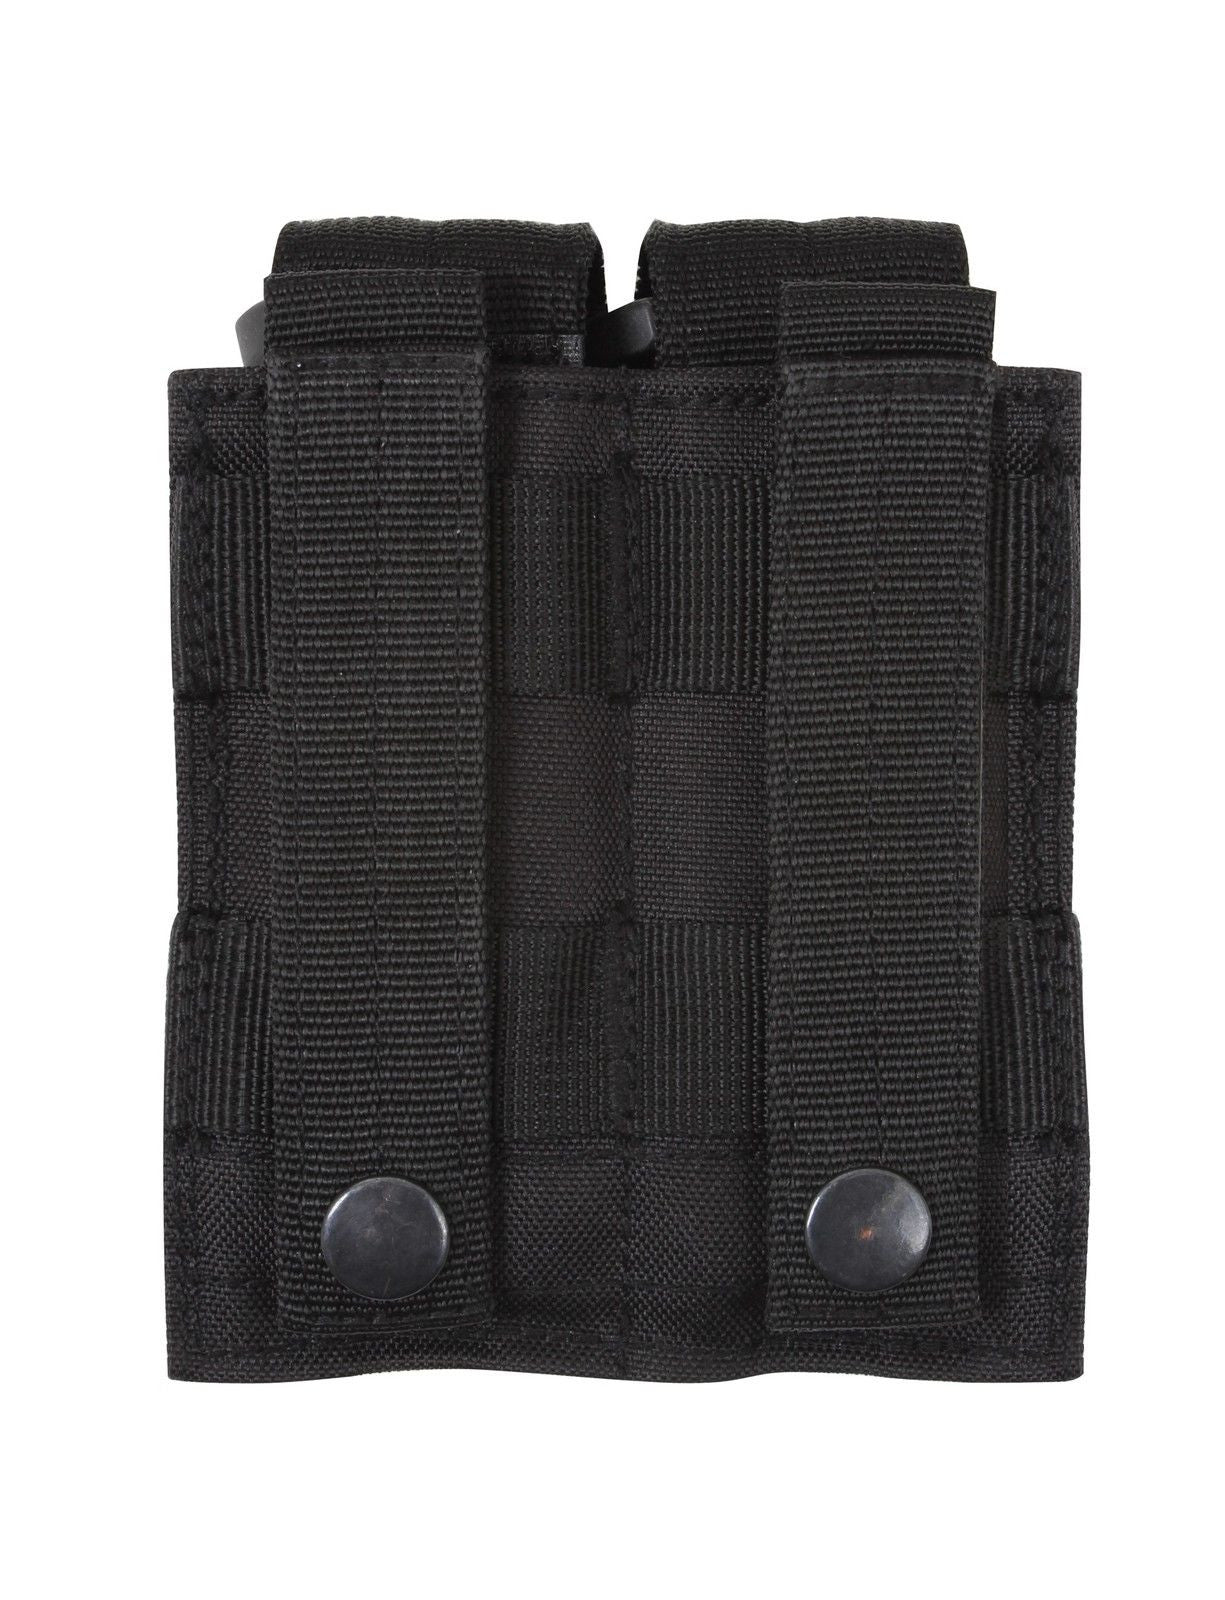 MOLLE Double Pouch - Black or Coyote Brown - 4.25" x 5"